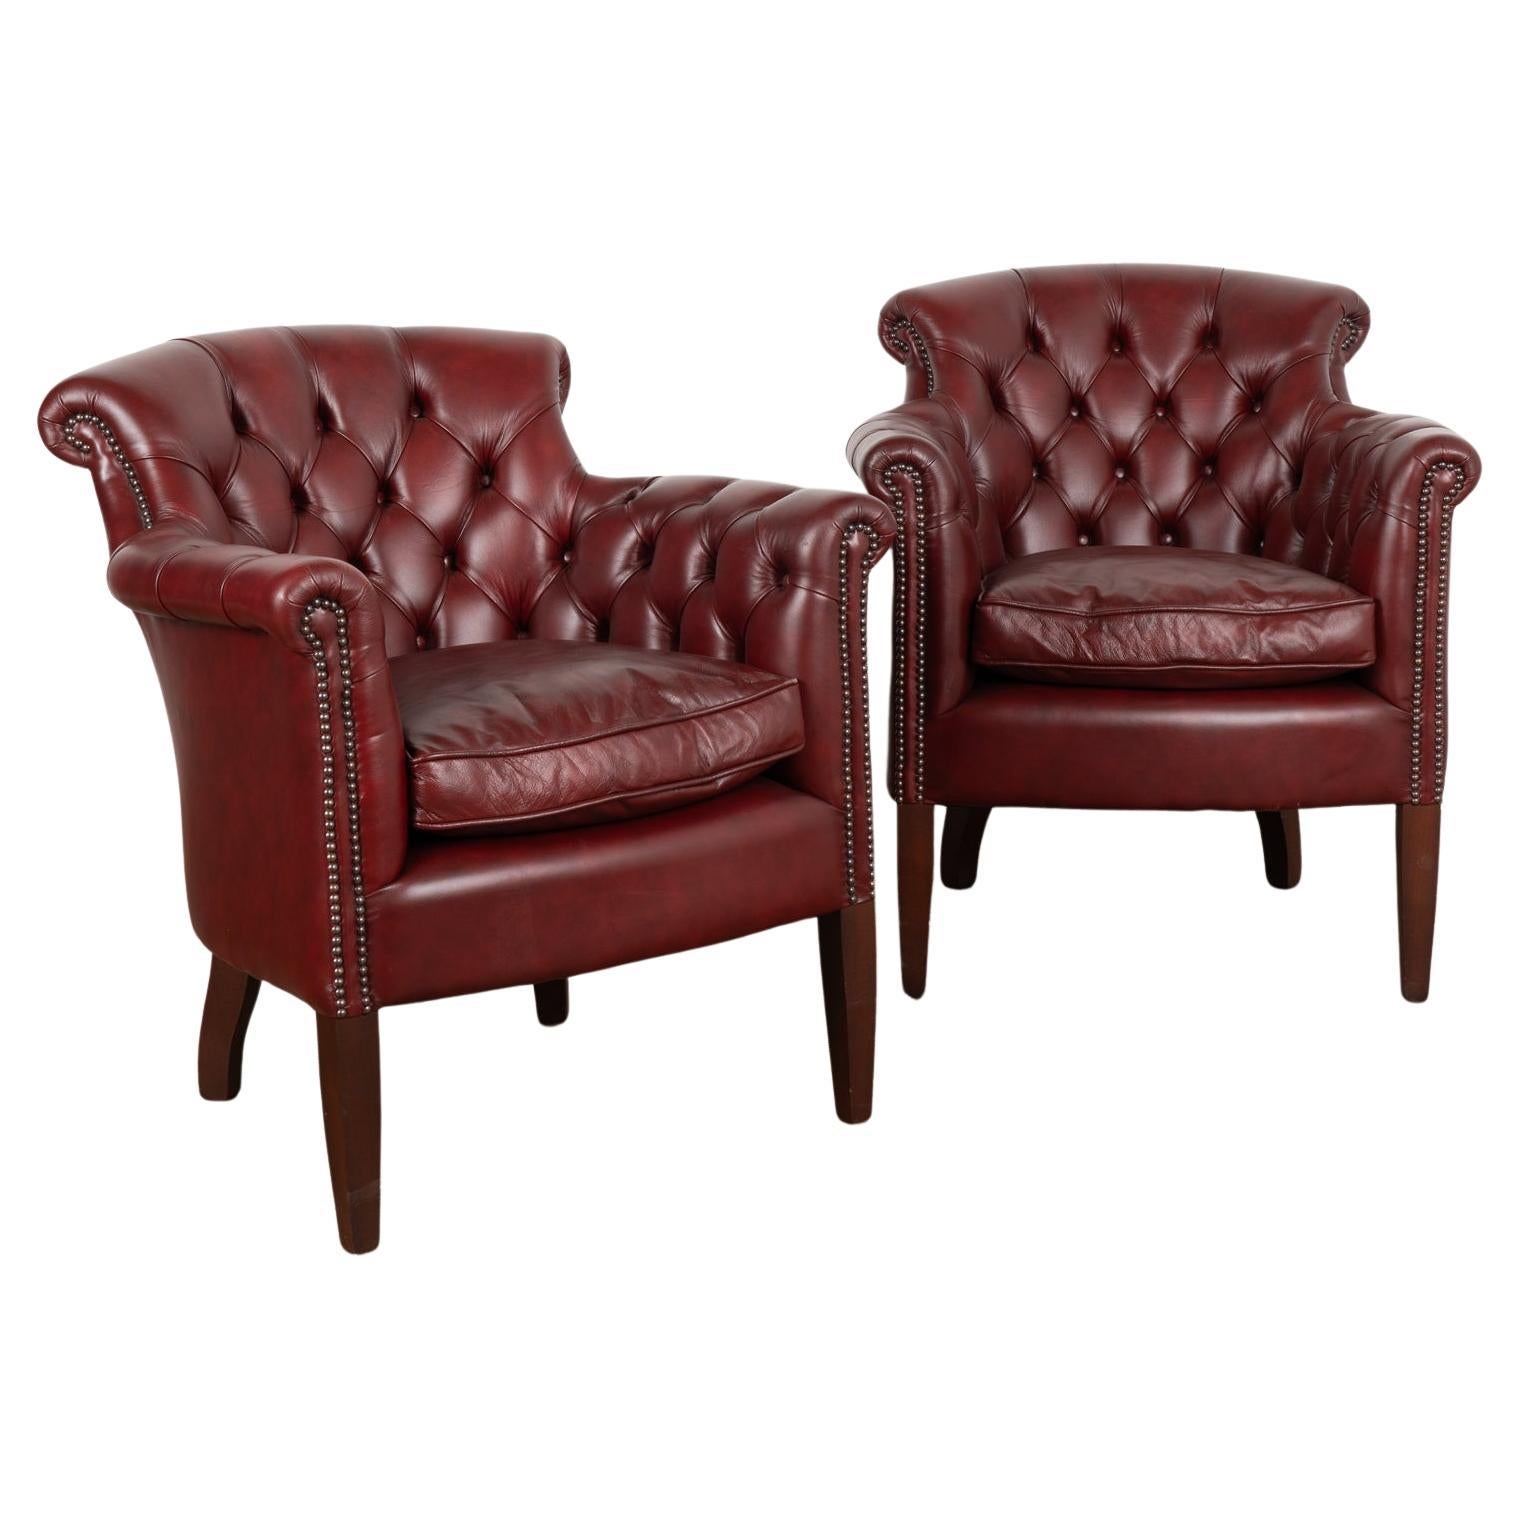 Pair, Vintage Red Leather Chesterfield Club Armchairs, Denmark circa 1940-60 For Sale